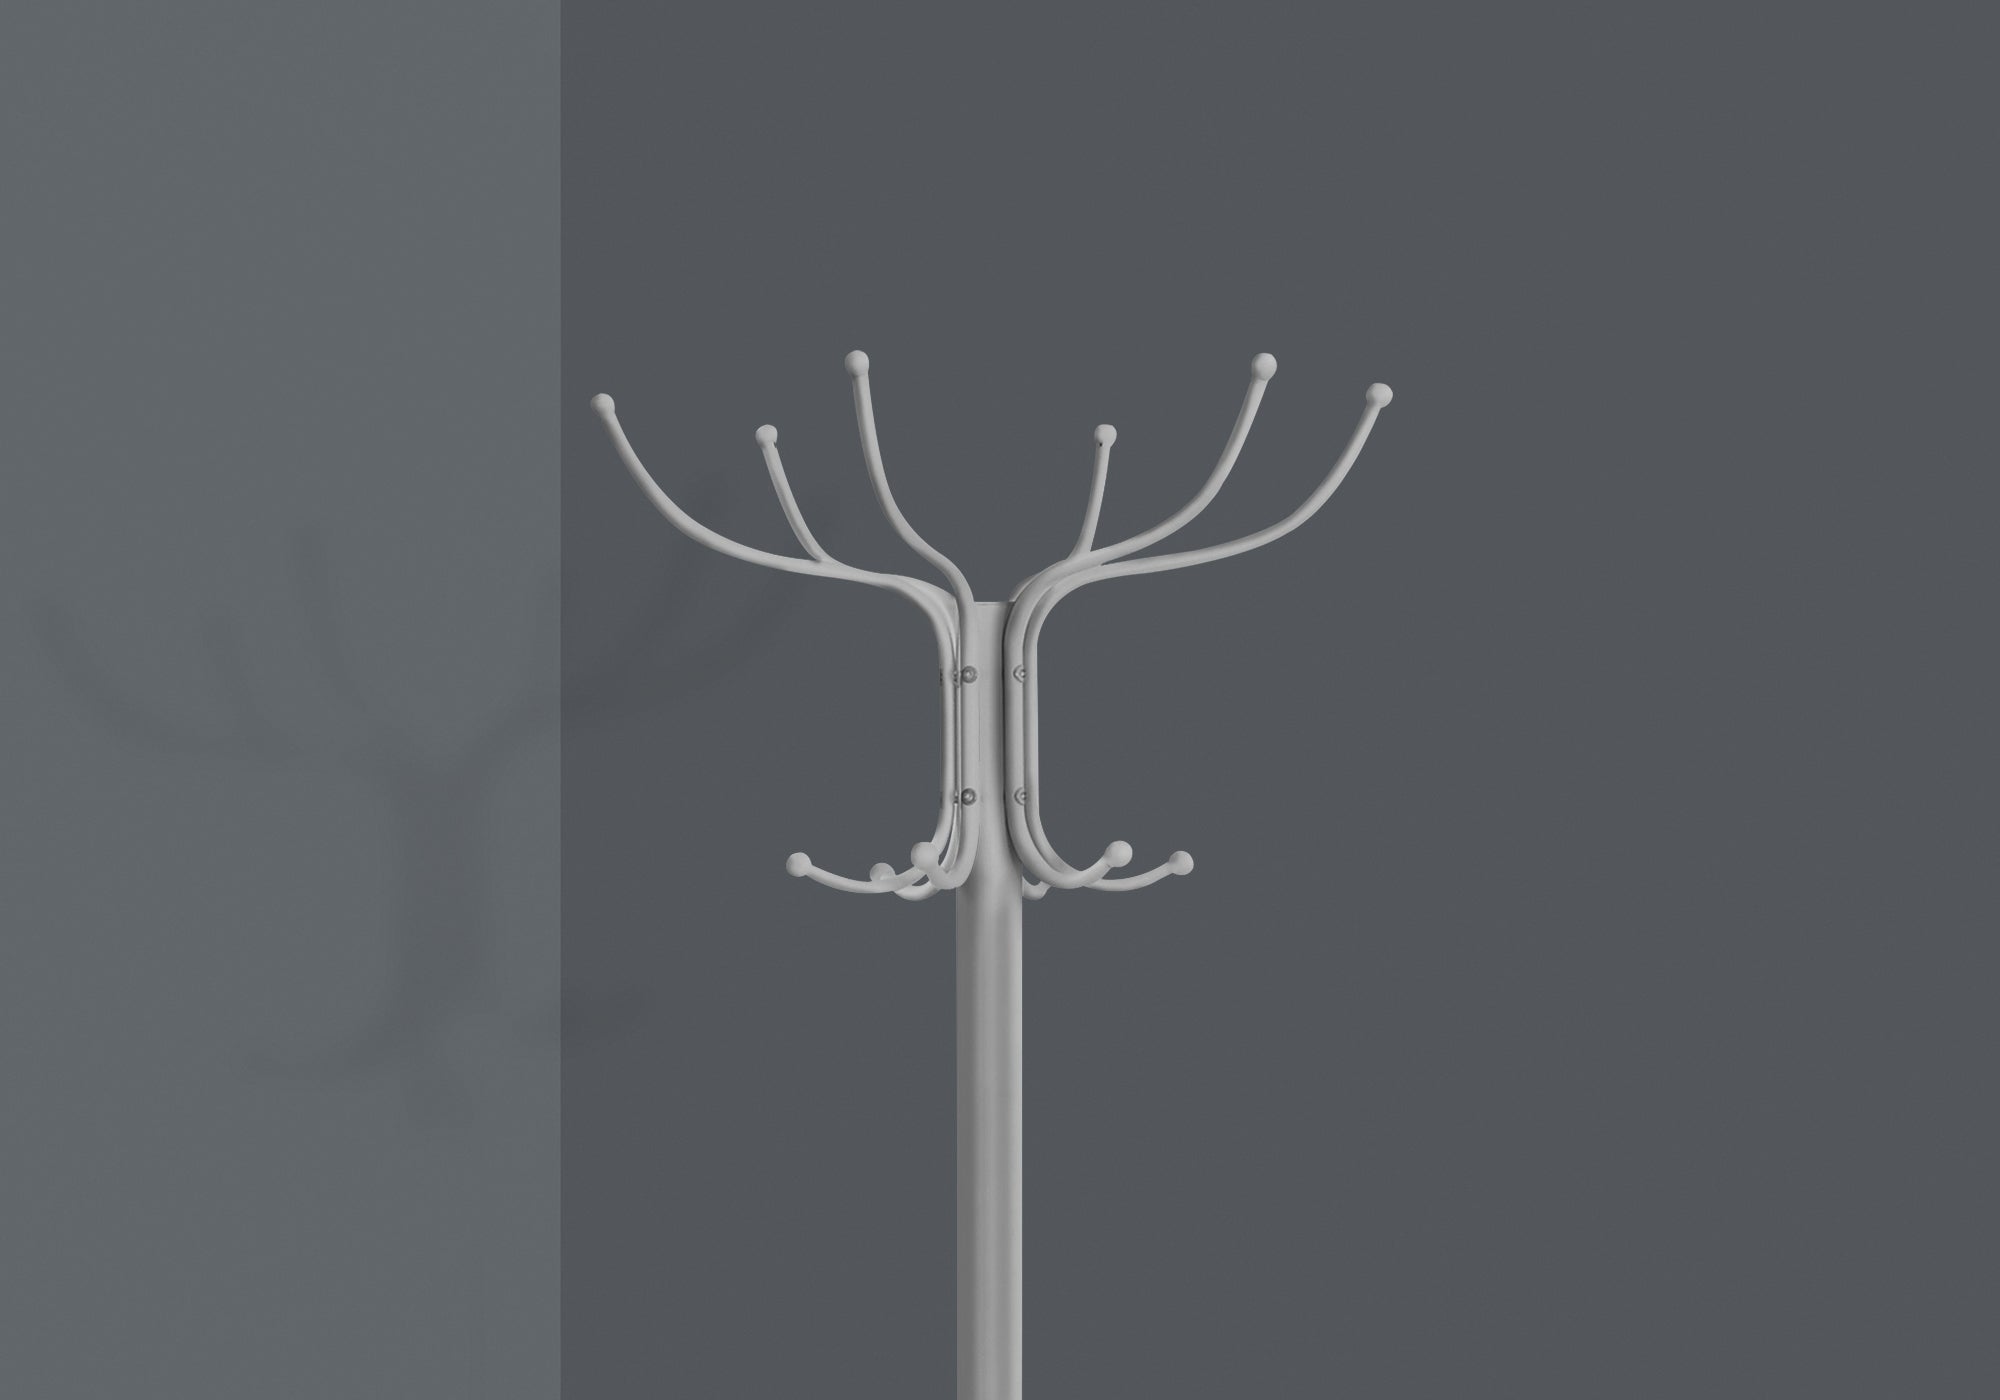 Coat Rack - 70H / Silver Metal With An Umbrella Holder